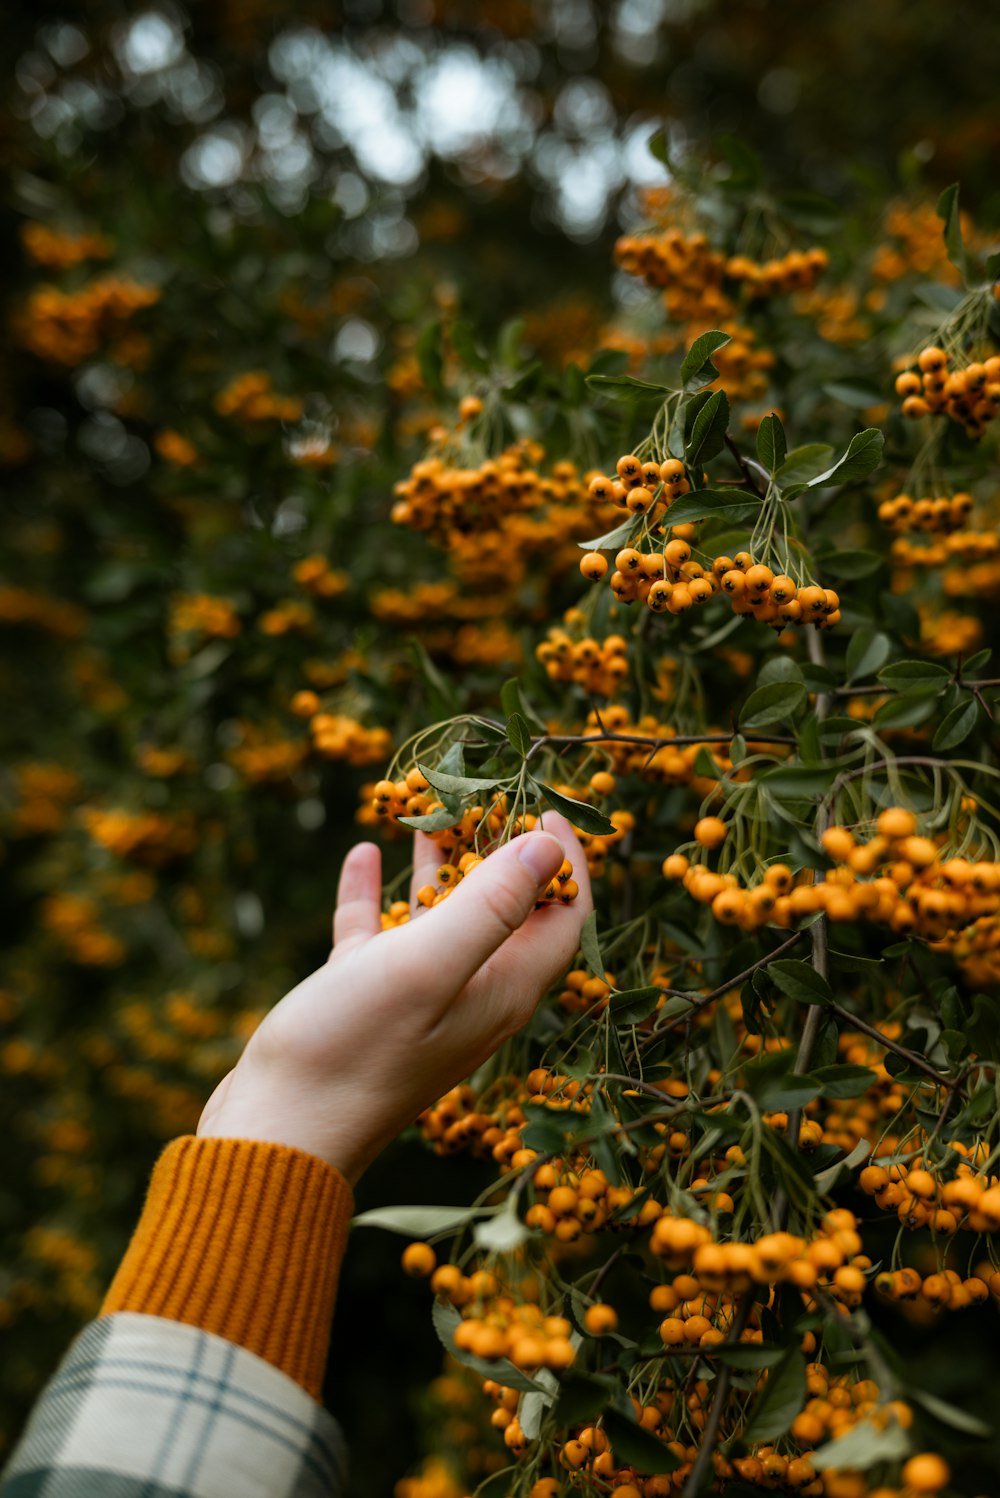 a hand reaching for a plant with yellow flowers